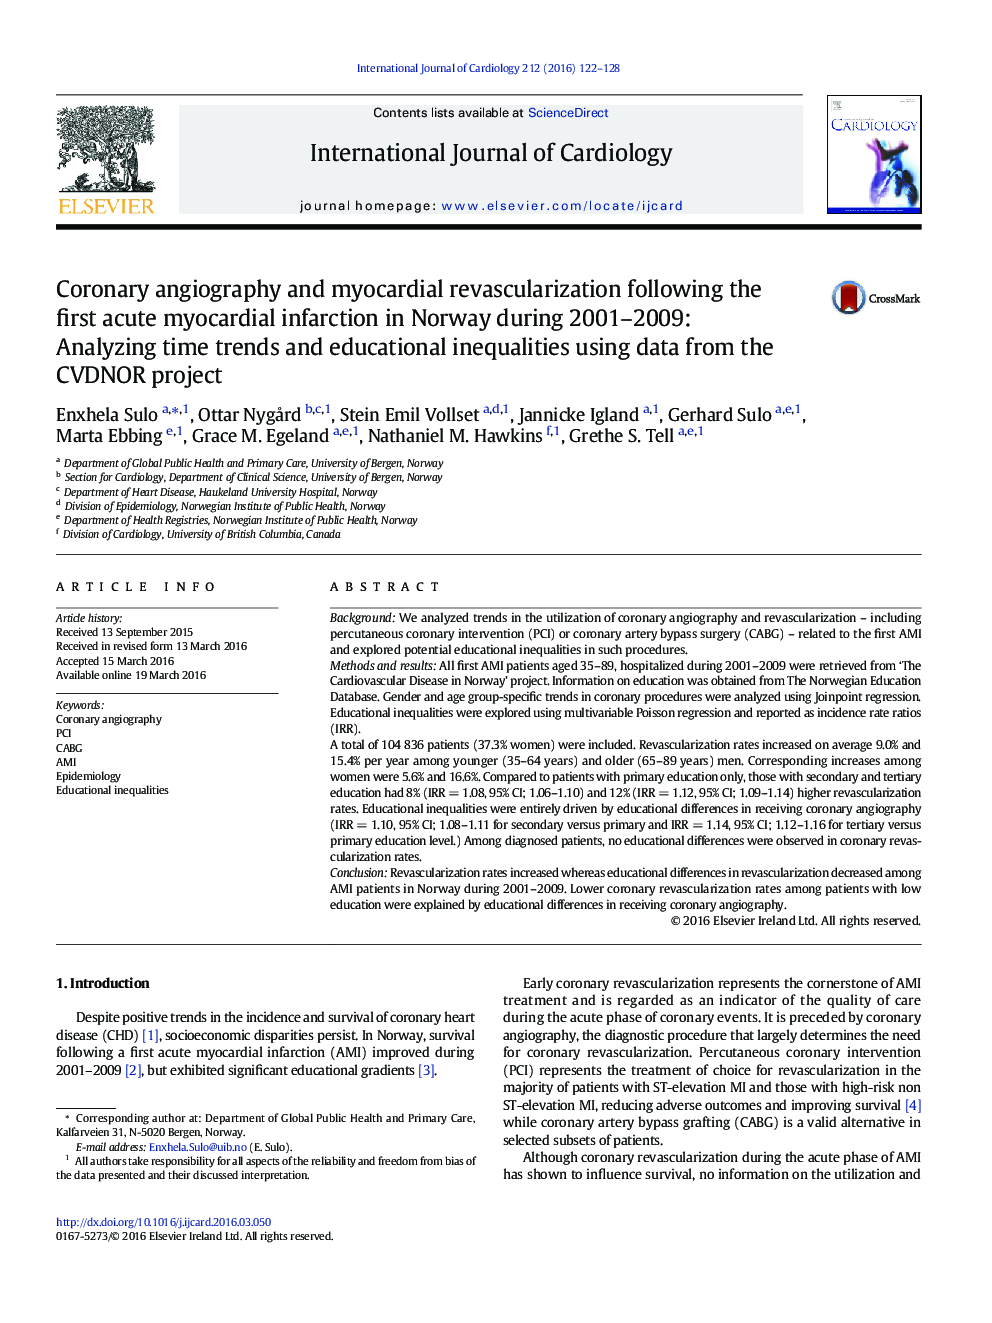 Coronary angiography and myocardial revascularization following the first acute myocardial infarction in Norway during 2001-2009: Analyzing time trends and educational inequalities using data from the CVDNOR project